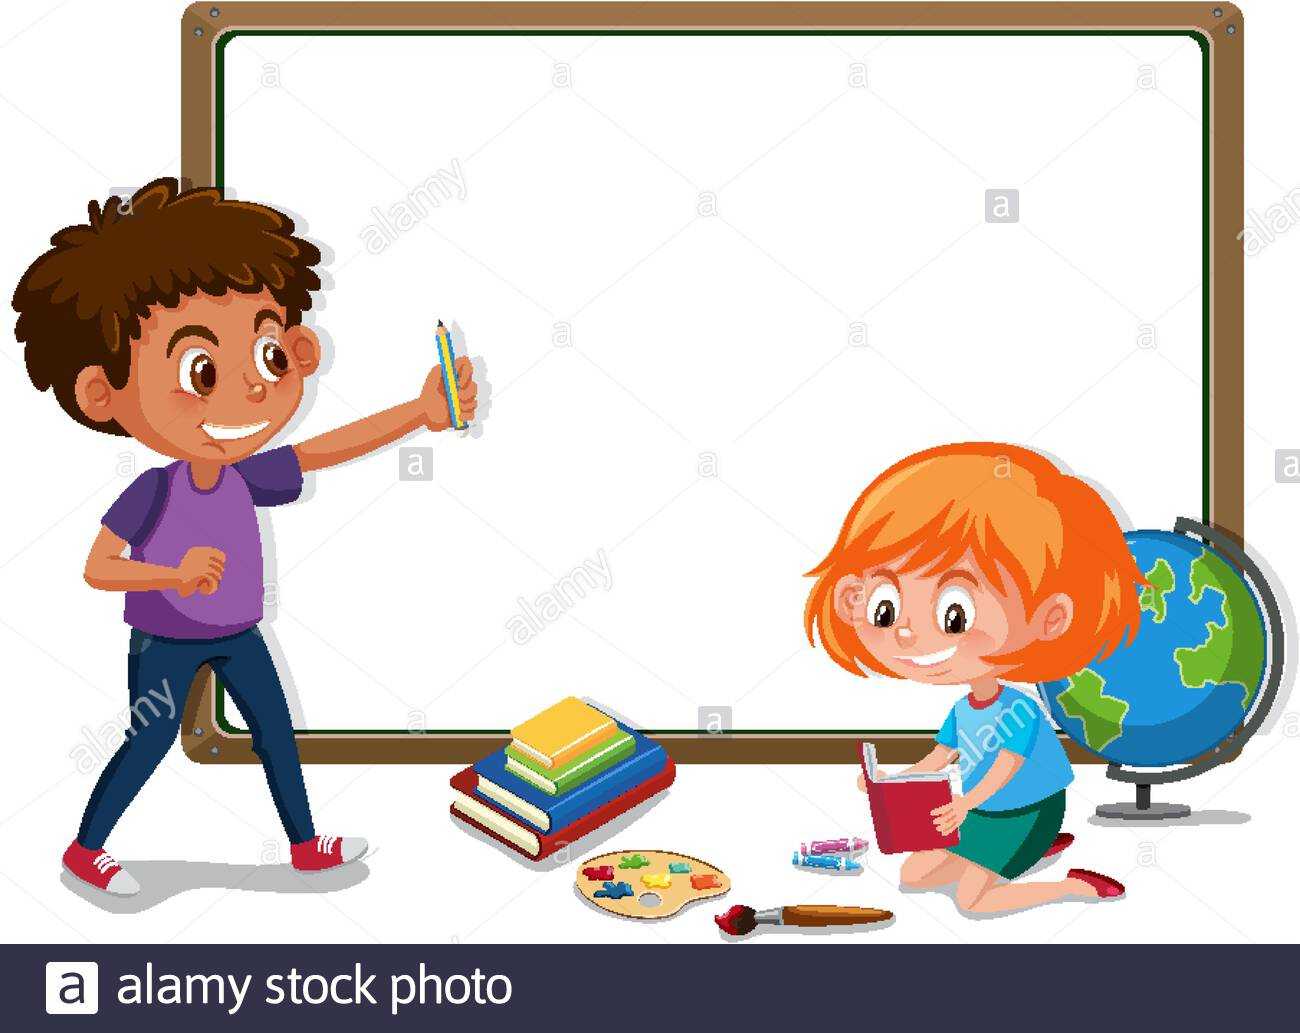 Banner Template With Boy And Girl In The Classroom Throughout Classroom Banner Template